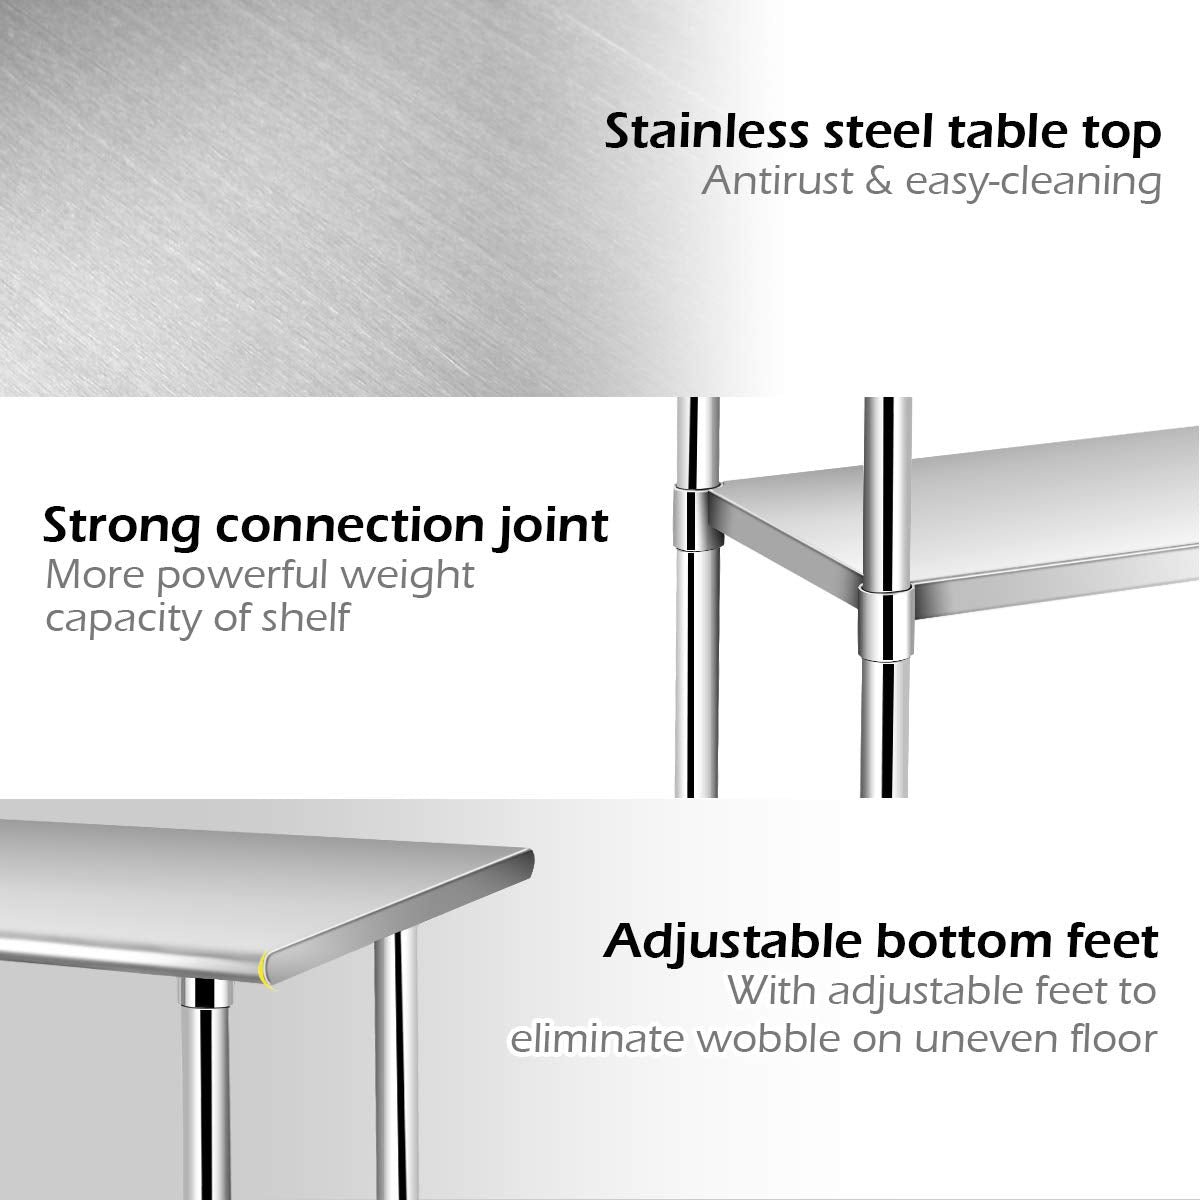 Giantex 48 x 30 Inches Stainless Steel Table w/ 4 Caster Wheels